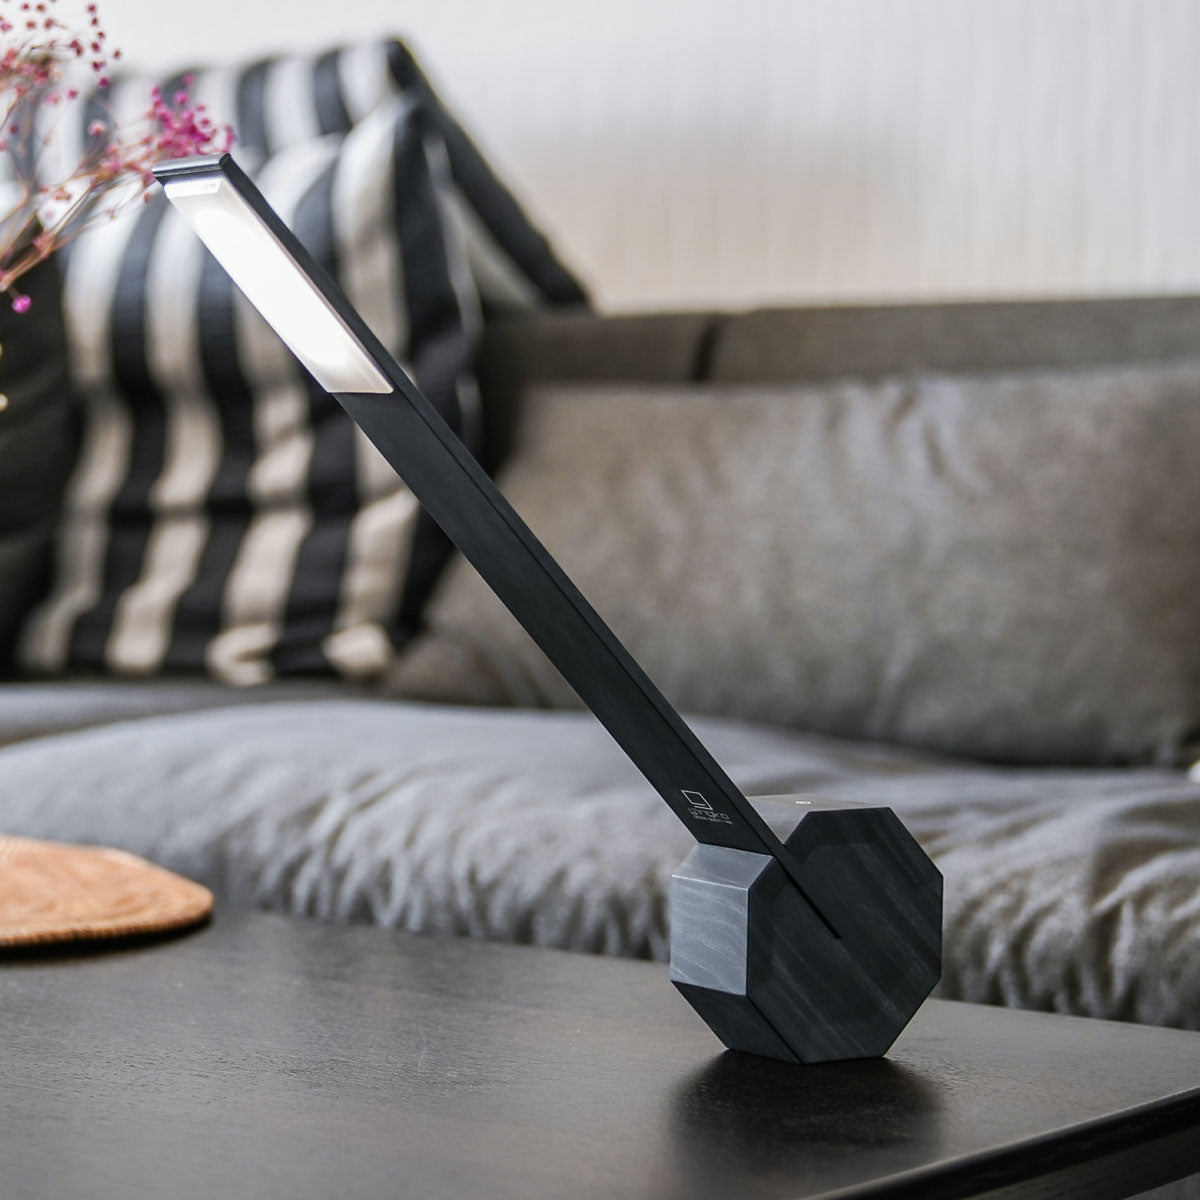 The Octagon One Desk Lamp: Black displayed on a desk in front of a couch.